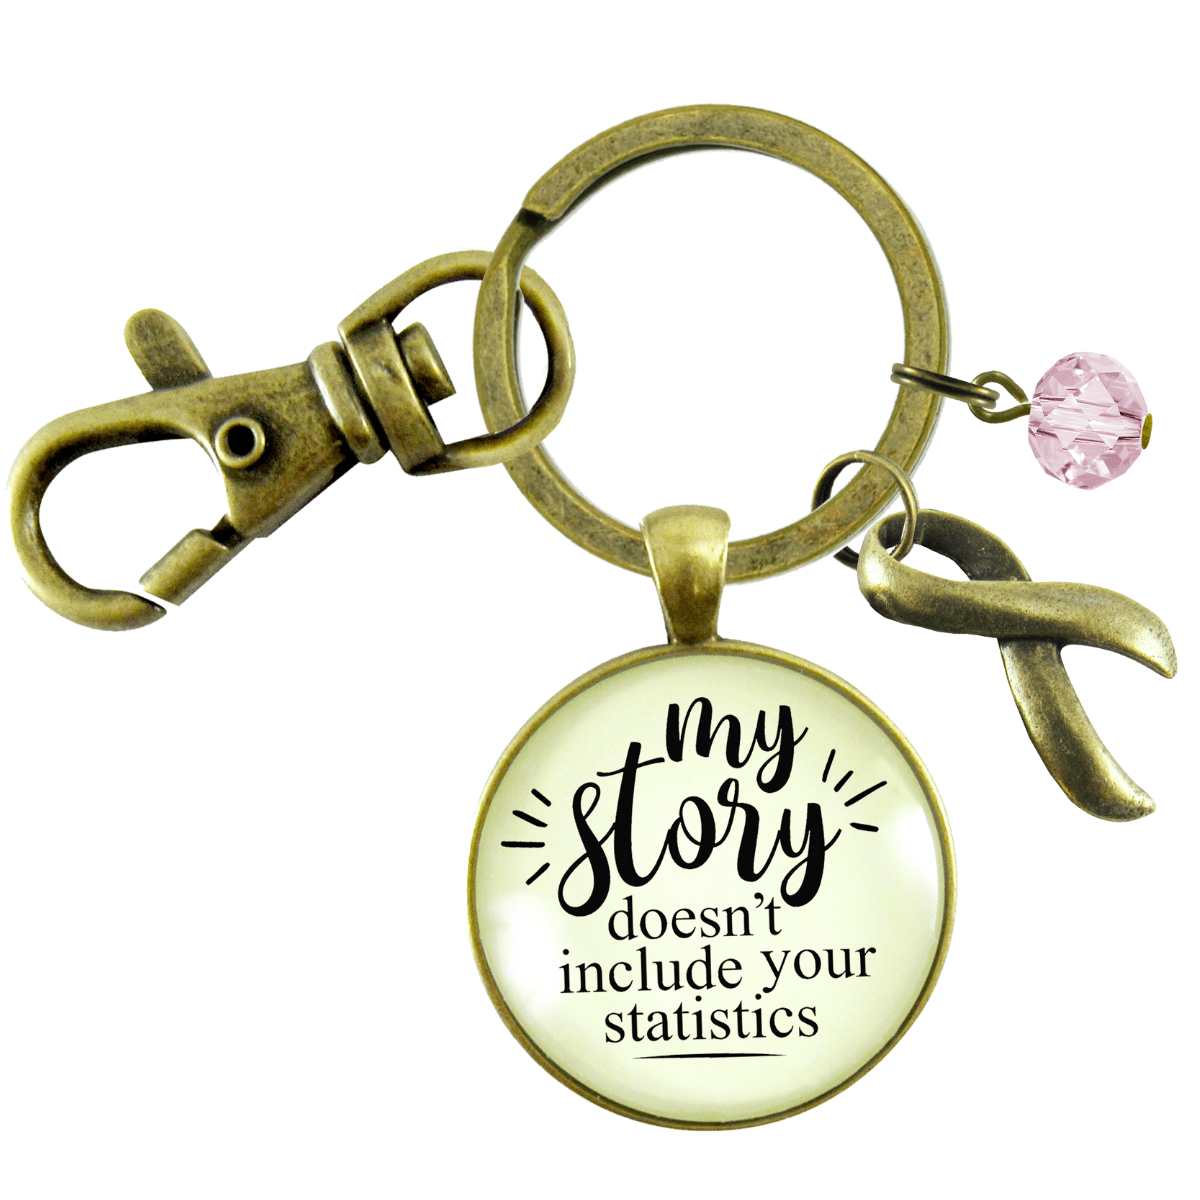 Breast Cancer Keychain My Story Doesn't Include Your Statistics Funny Mantra Gift Pink Awareness - Gutsy Goodness Handmade Jewelry;Breast Cancer Keychain My Story Doesn't Include Your Statistics Funny Mantra Gift Pink Awareness - Gutsy Goodness Handmade Jewelry Gifts